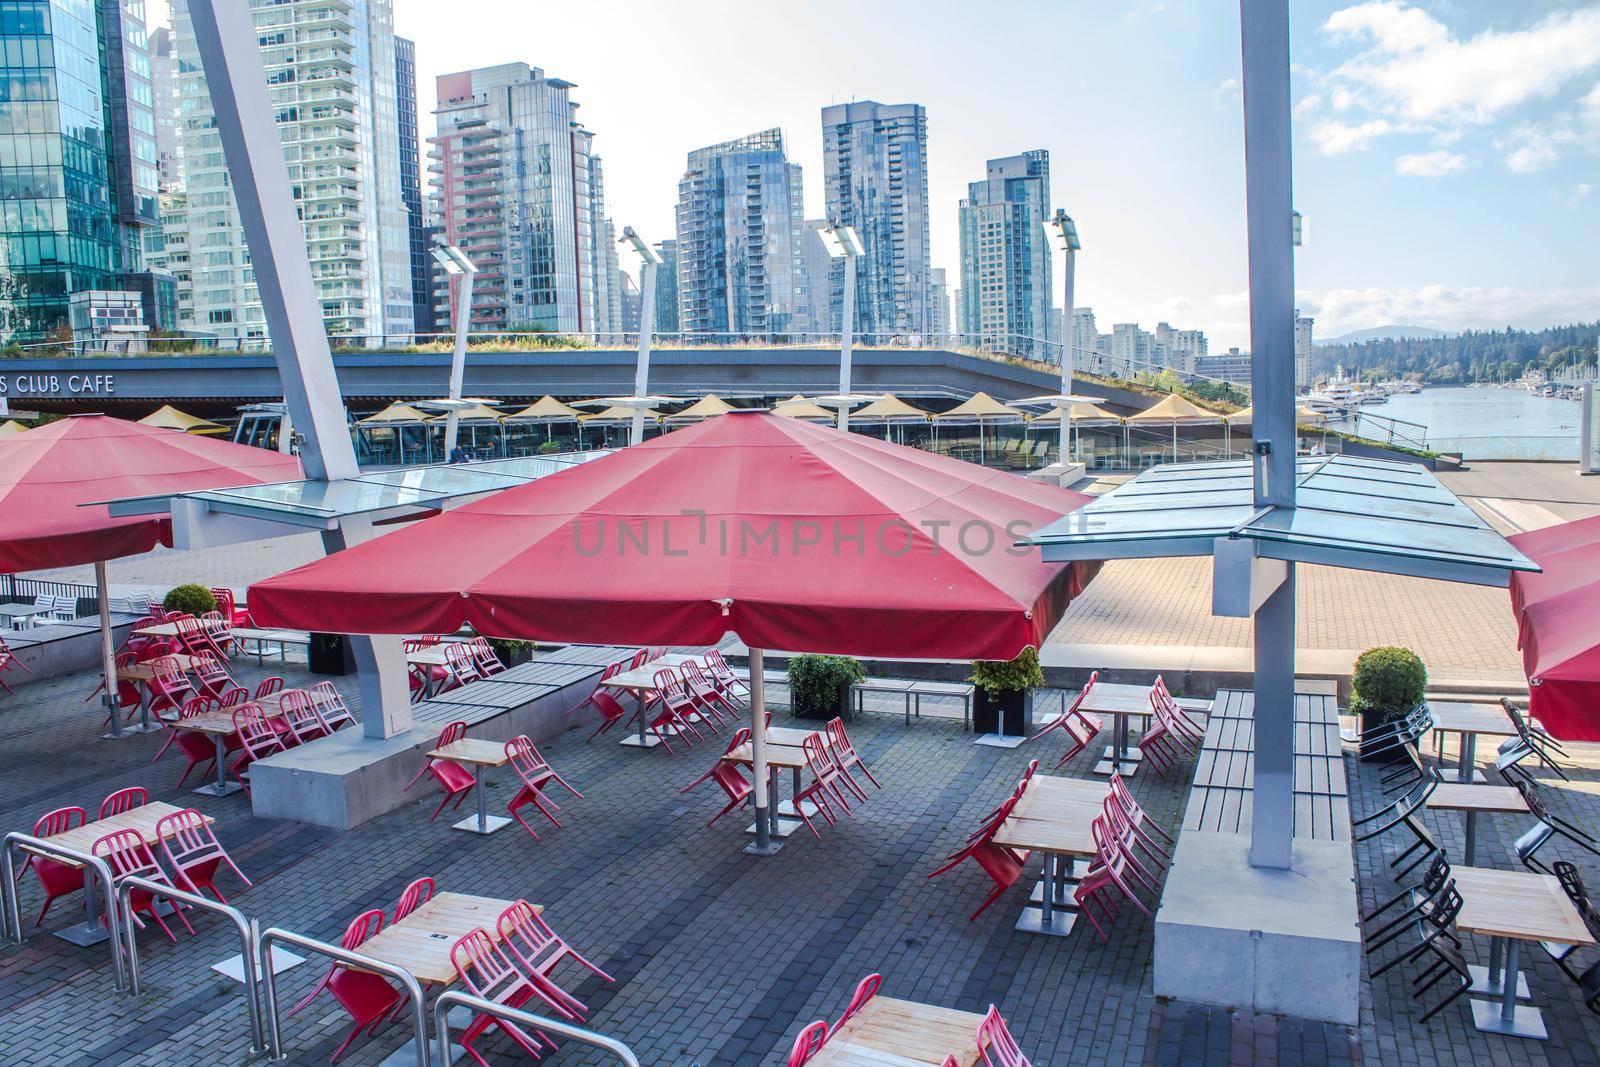 Vancouver, British Columbia, Canada - September 2, 2020: Tap and Barrel restaurant in Olympic Village, Convention Centre by JuliaDorian